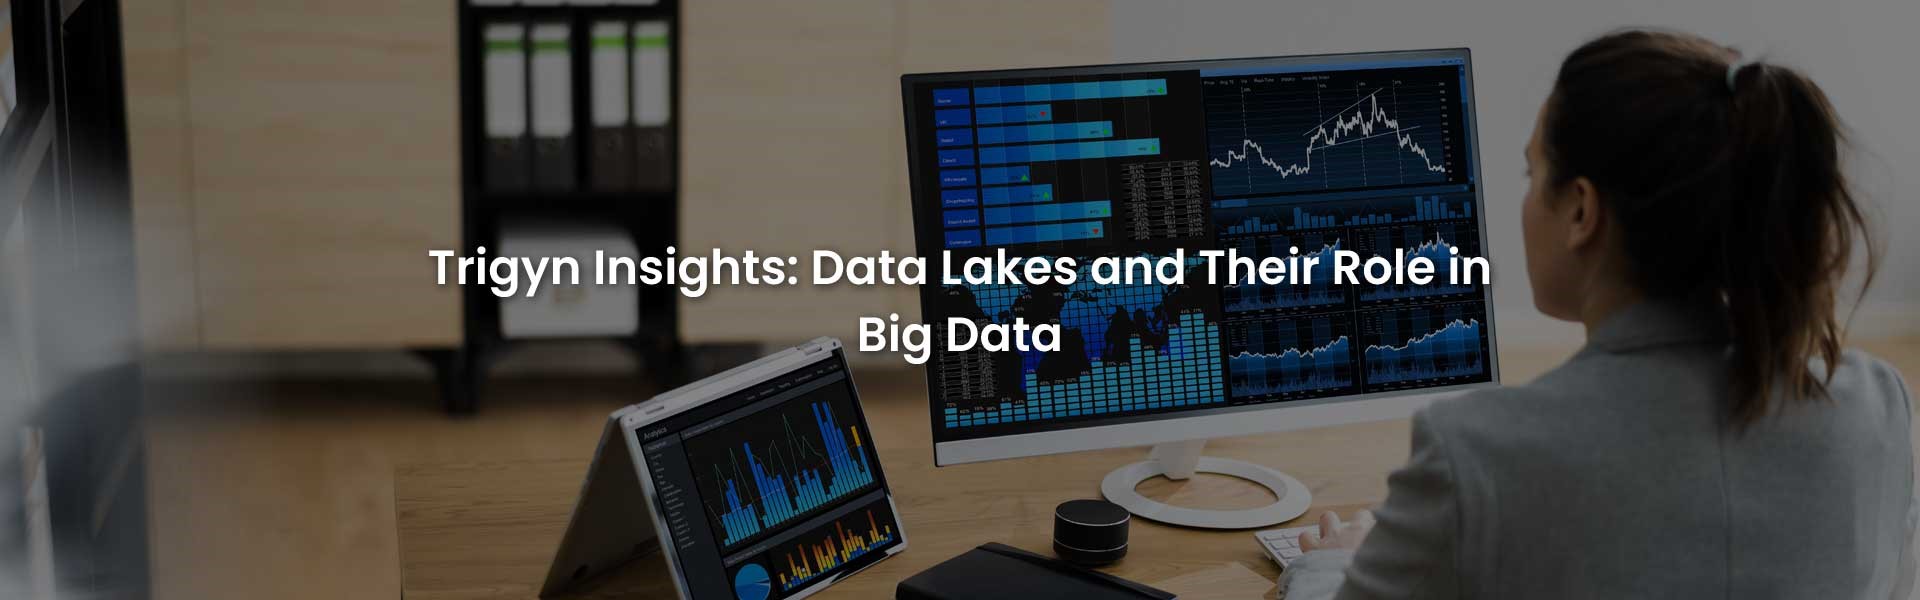 Data Lakes and Their Role in Big Data